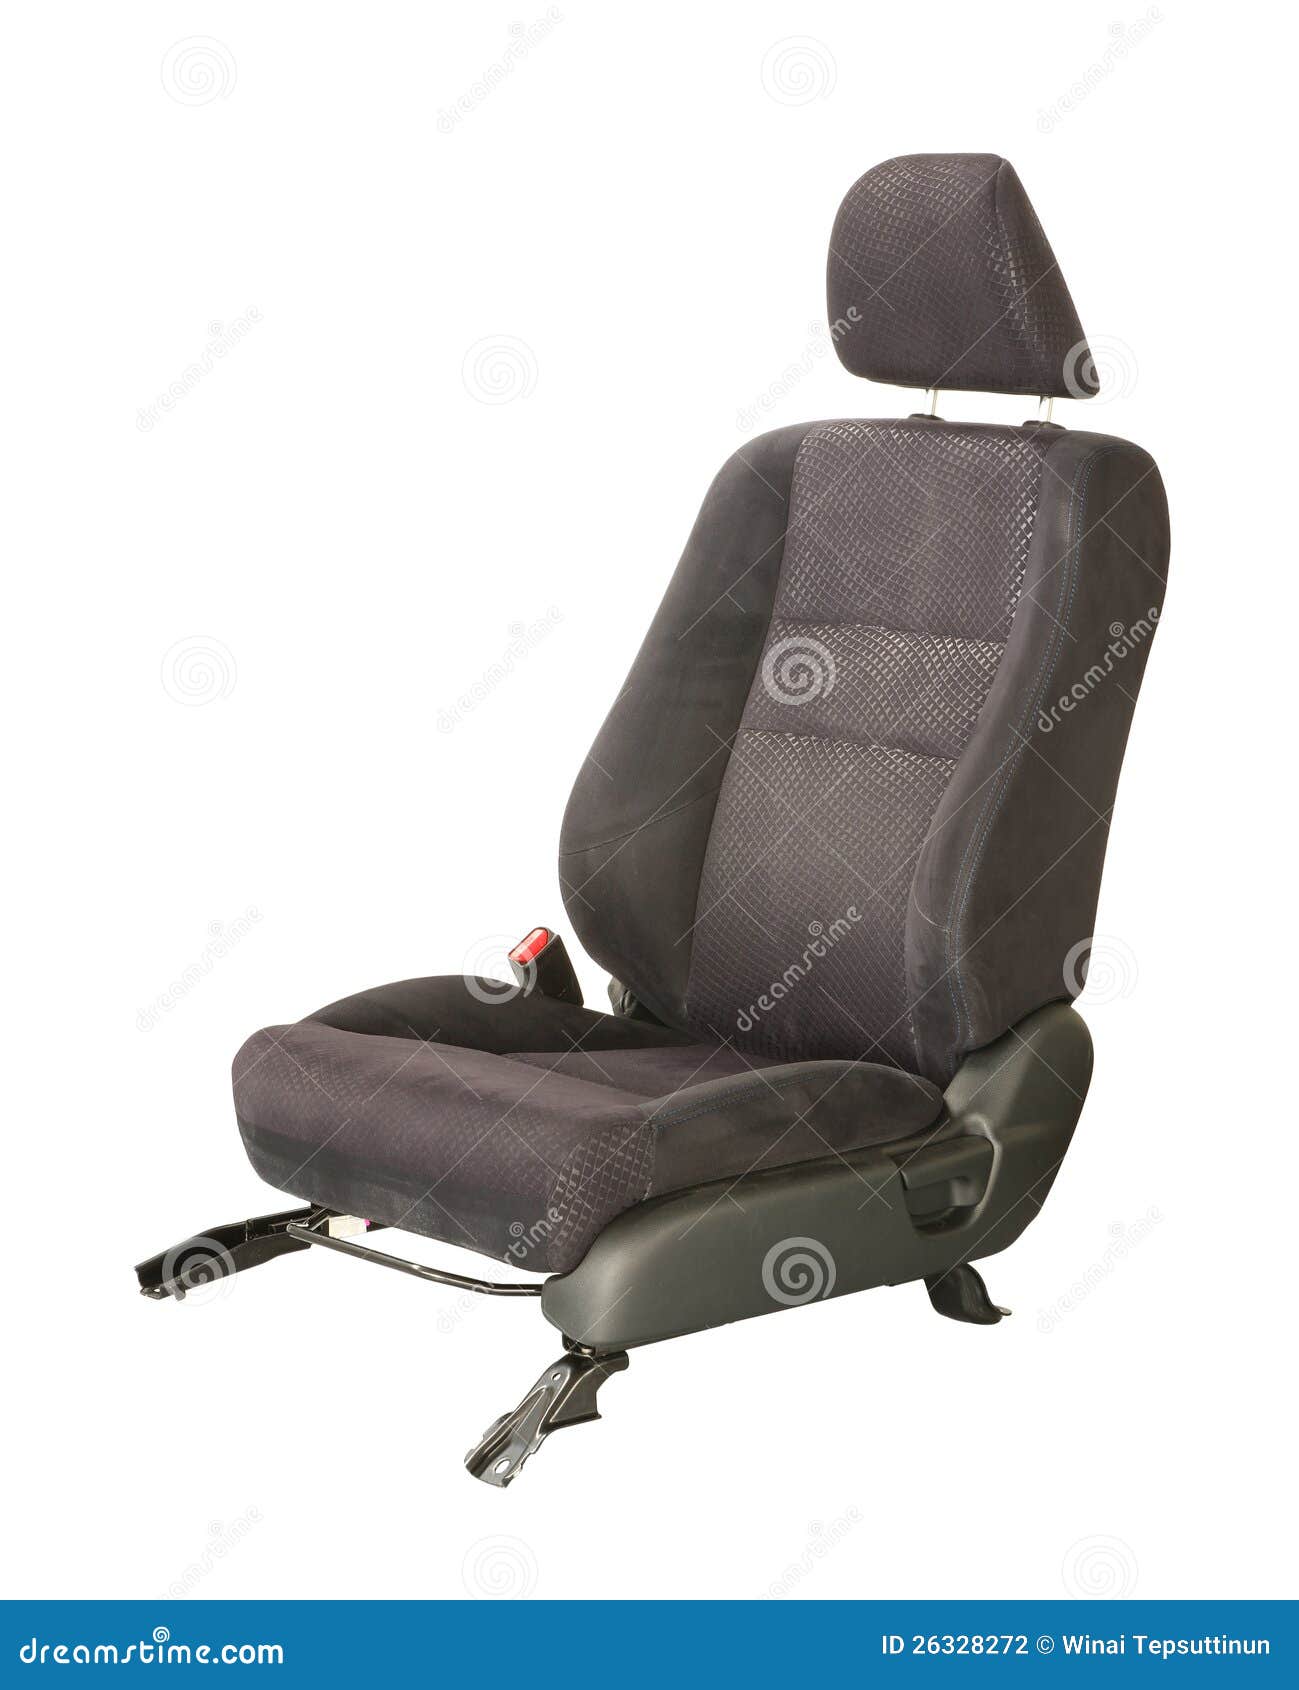 31,116 Car Seat Isolated Royalty-Free Photos and Stock Images